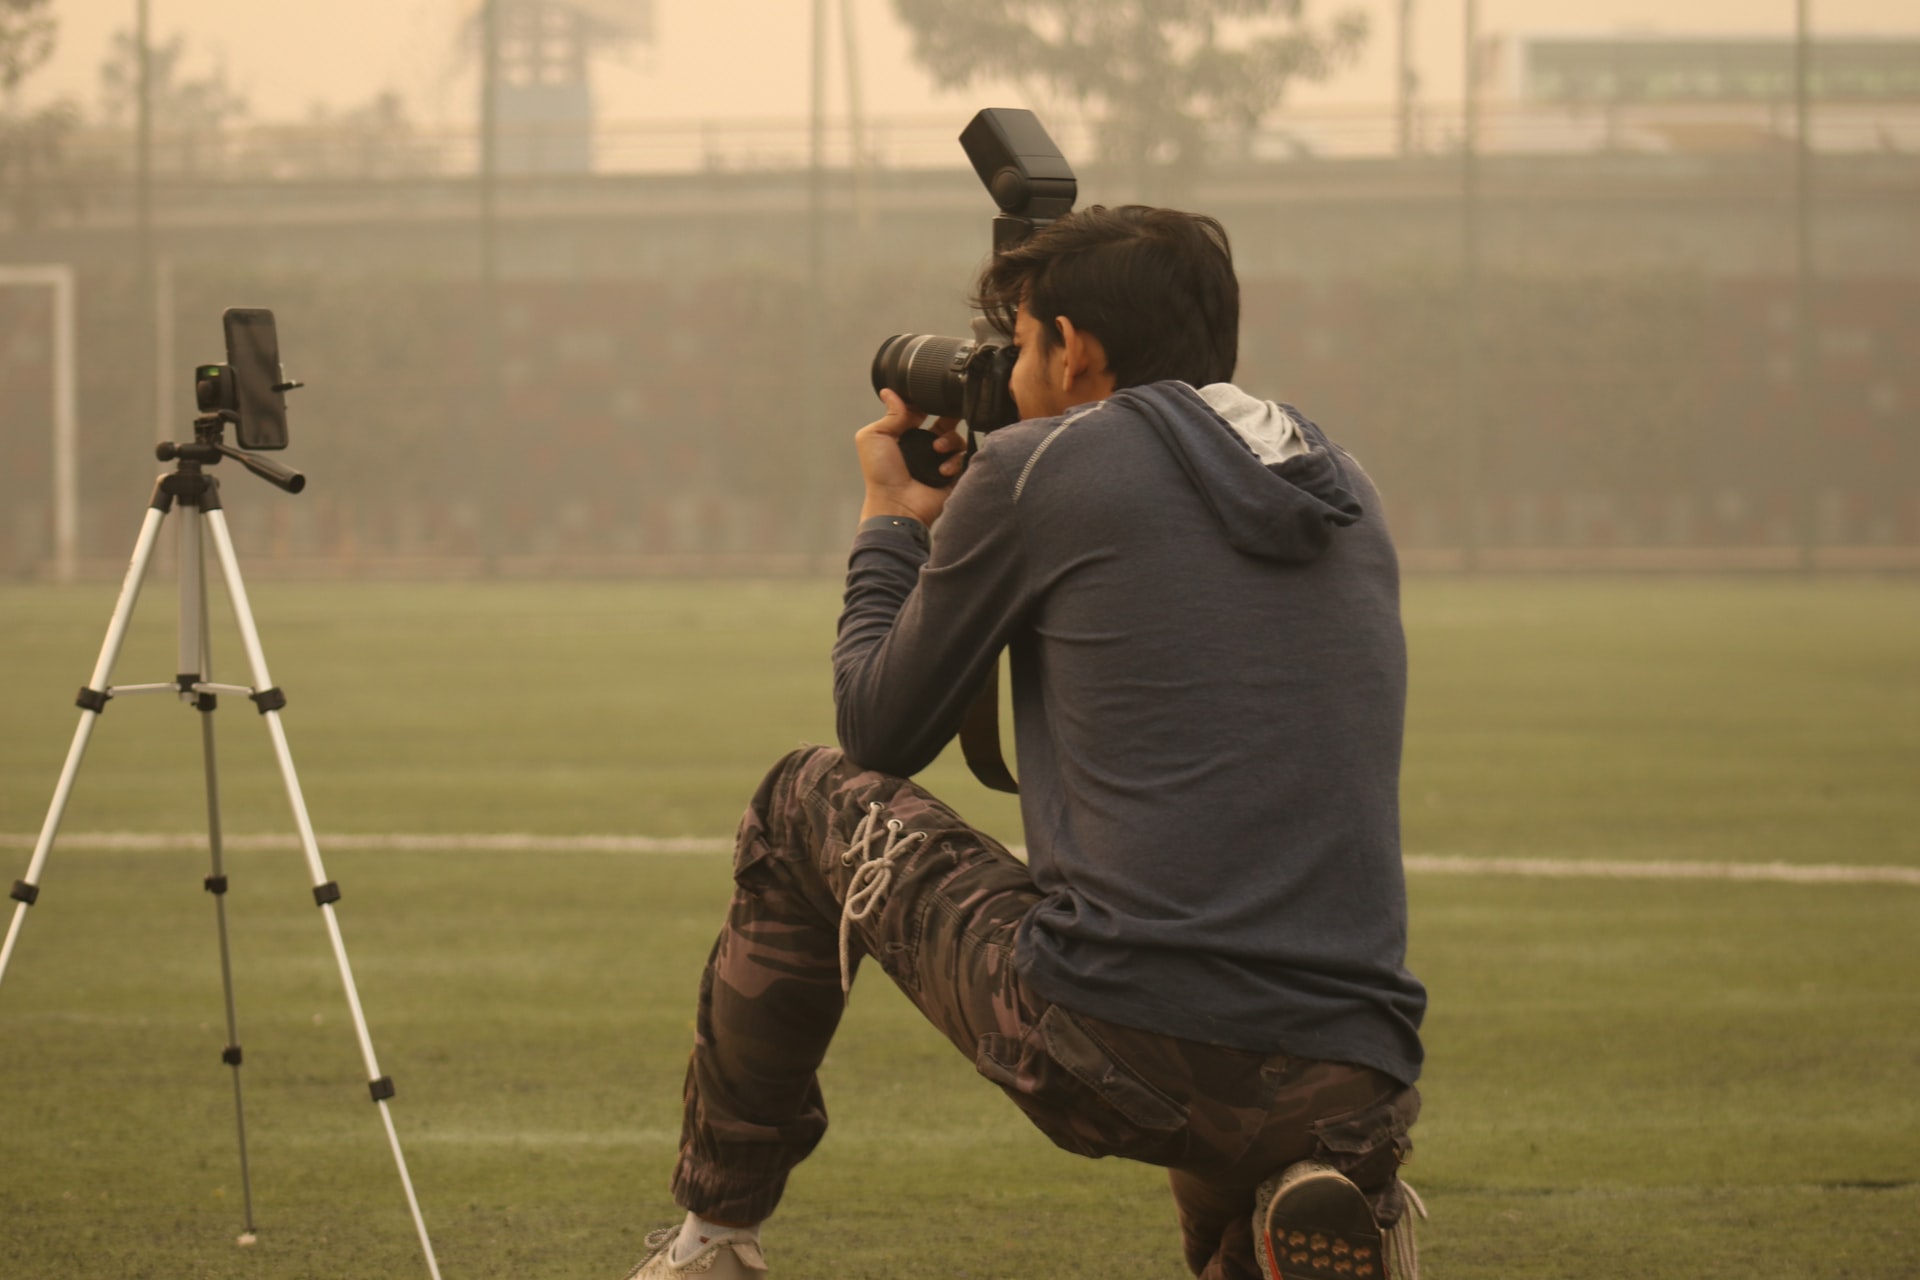 The Complete Guide to Hiring a Sport Photographer